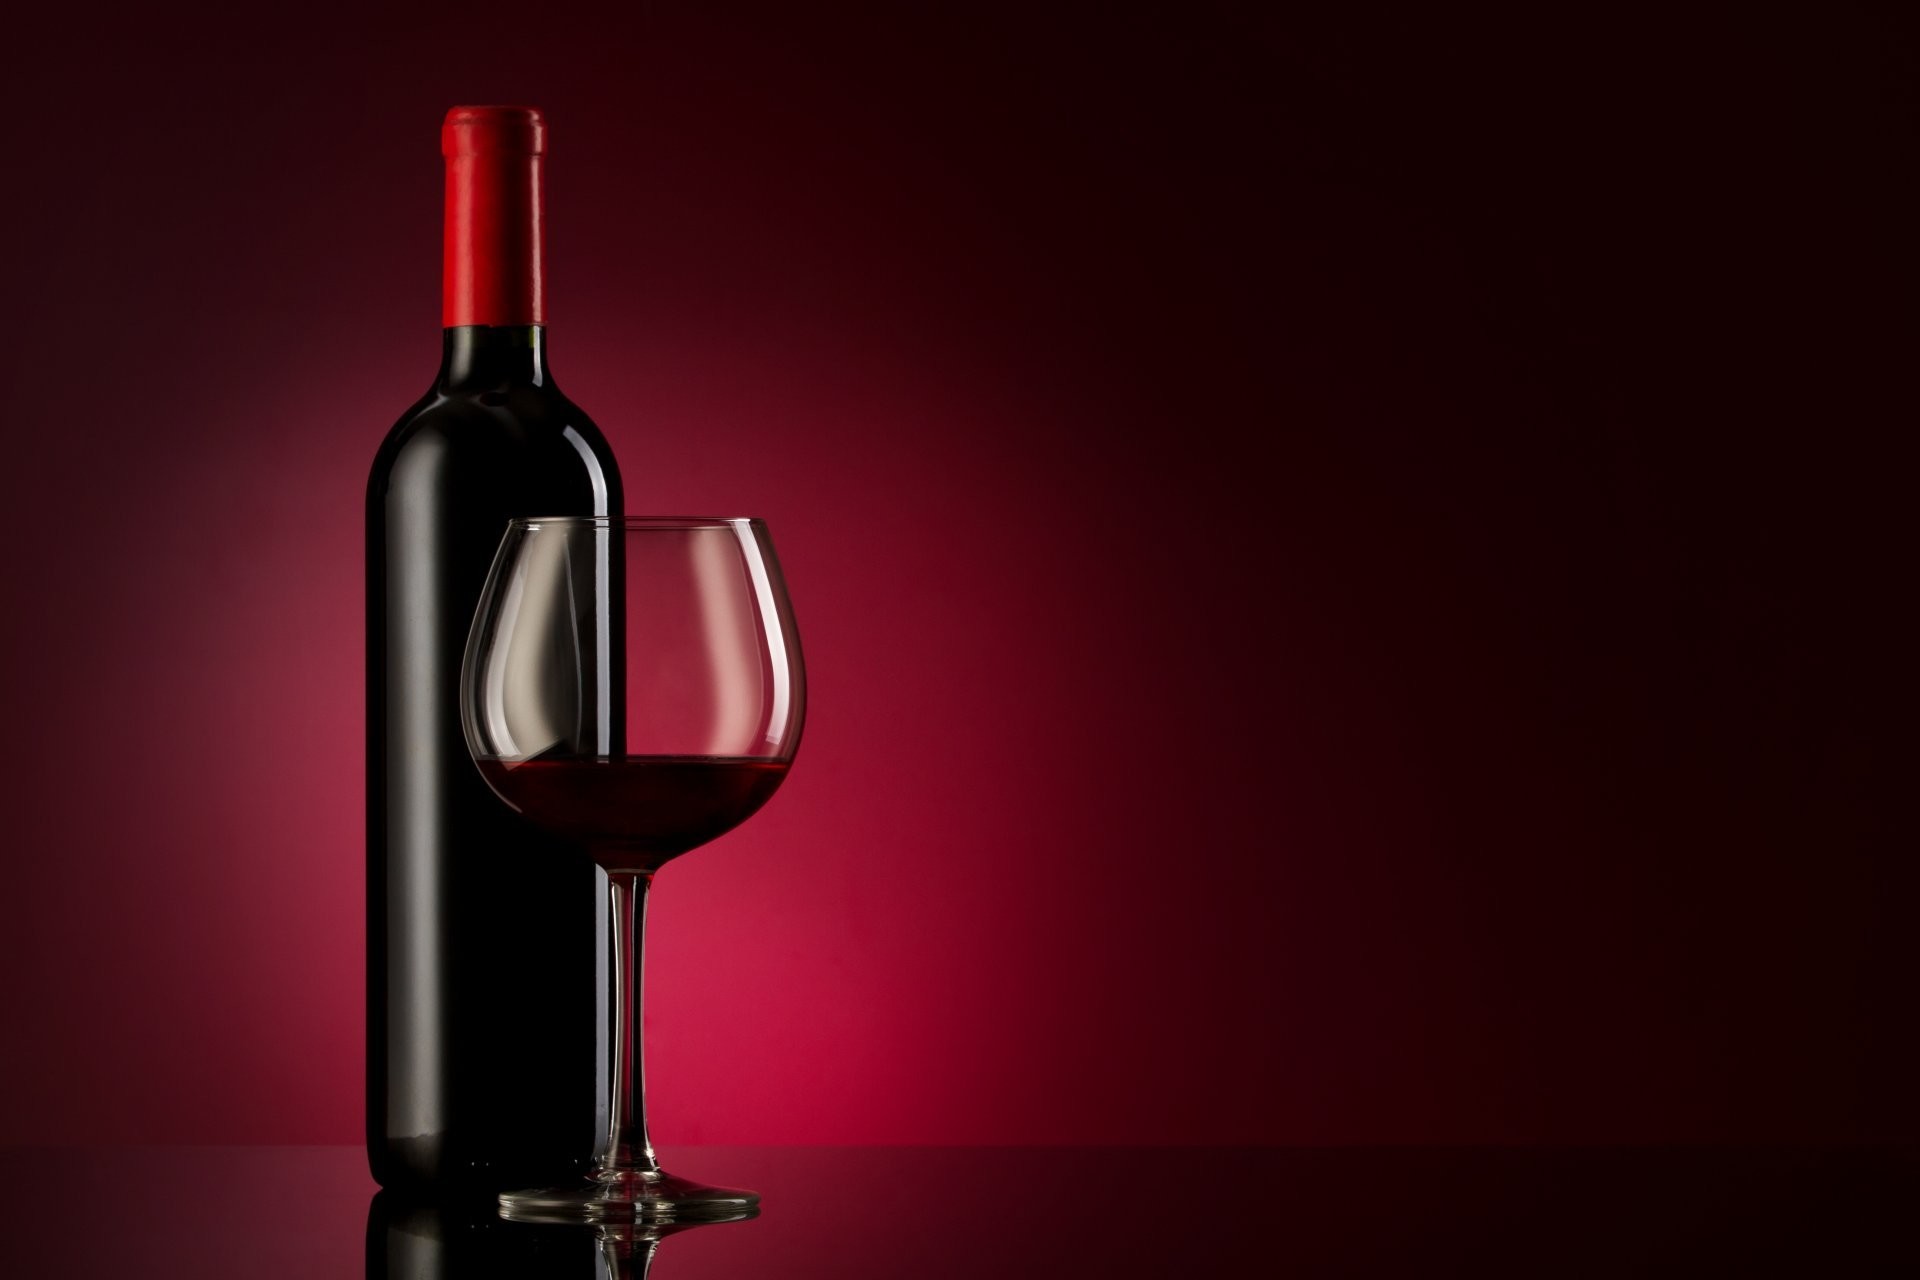 1920x1280 wine red a bottle glass glass alcohol background burgundy